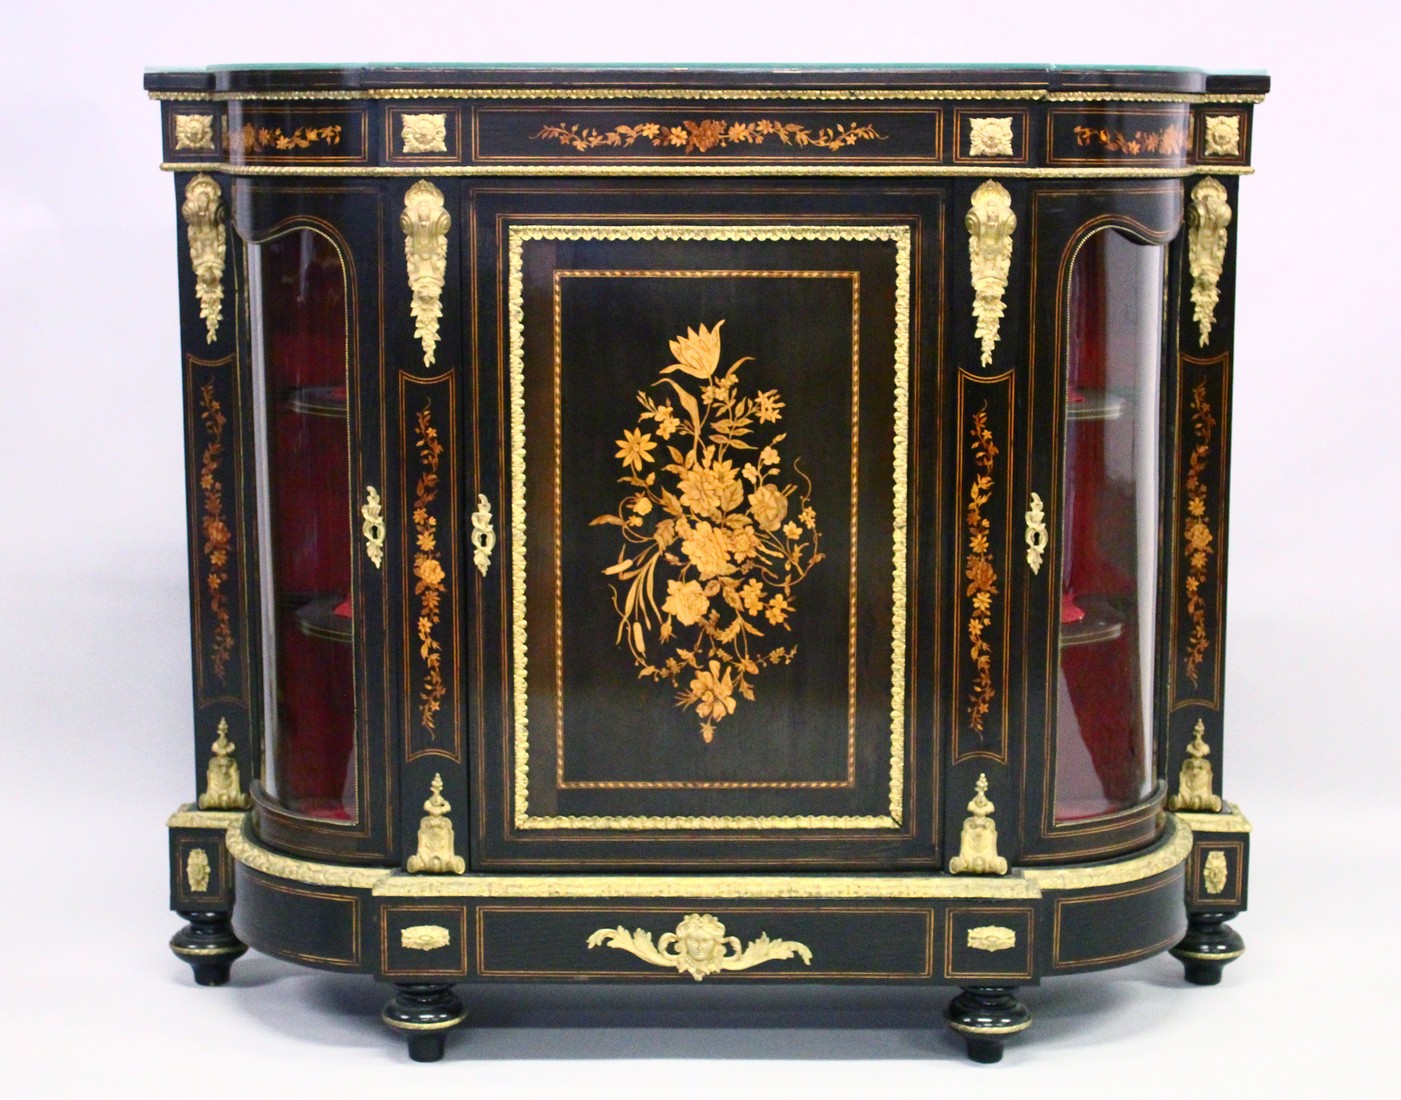 A GOOD 19TH CENTURY FRENCH EBONY AND MAHOGANY CREDENZA marquetry panel to the front glass bowed